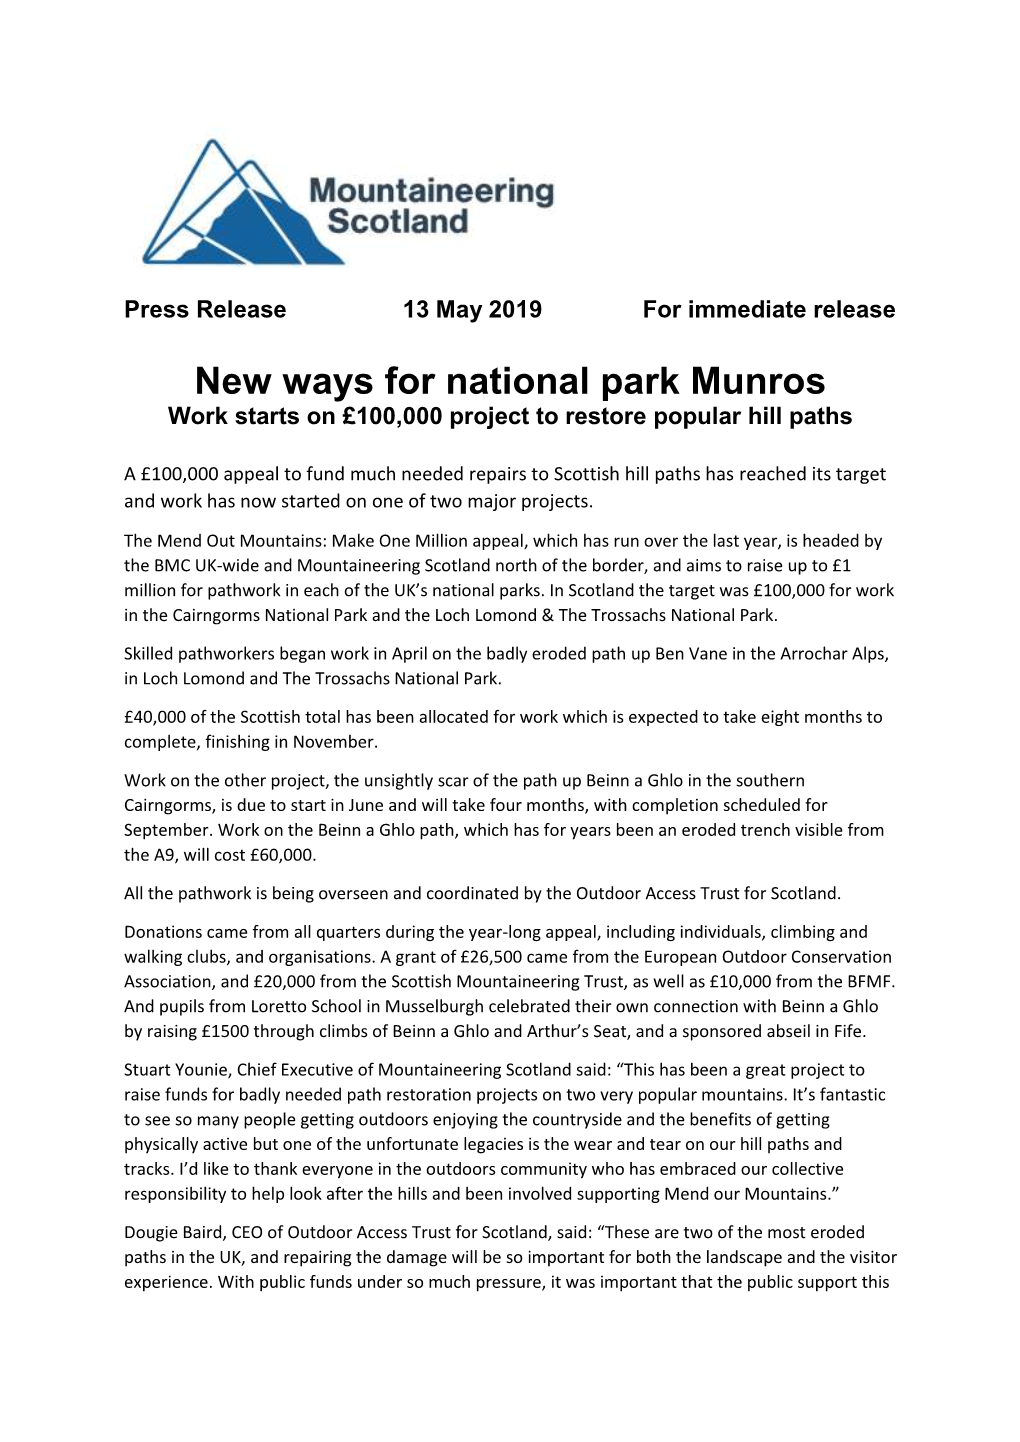 New Ways for National Park Munros Work Starts on £100,000 Project to Restore Popular Hill Paths